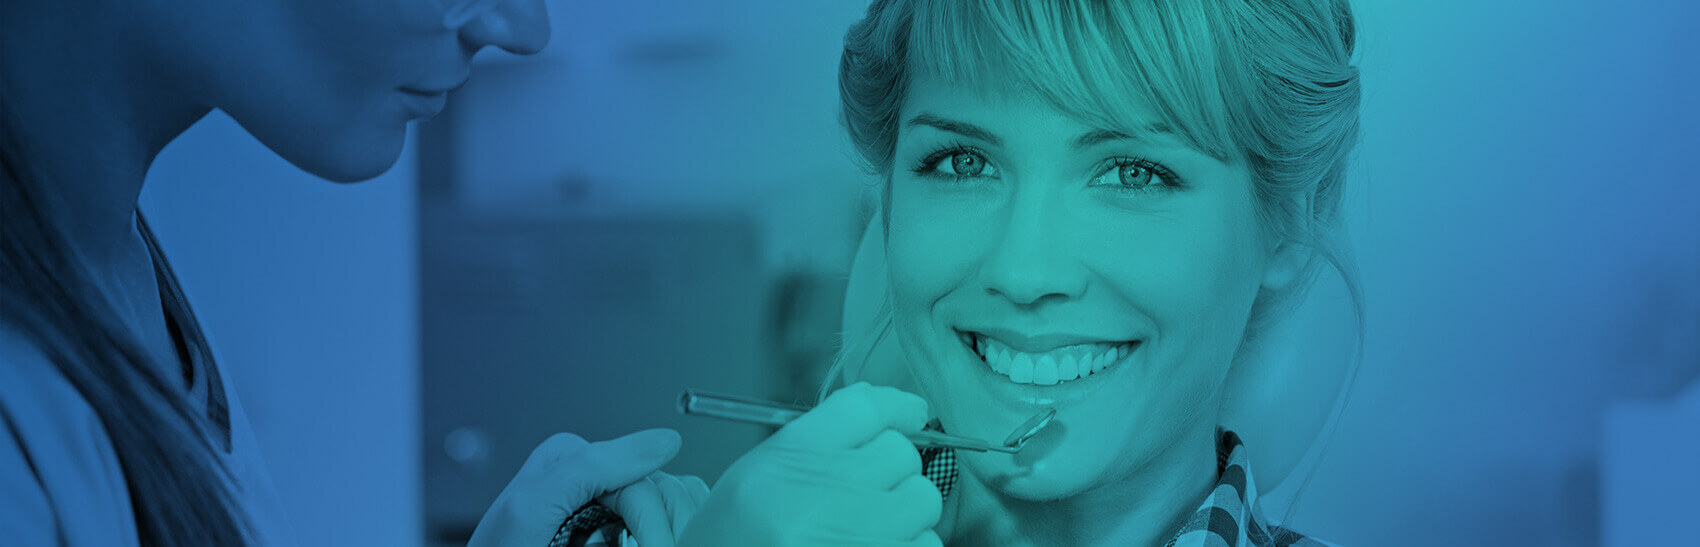 woman smiling during her dental cleaning